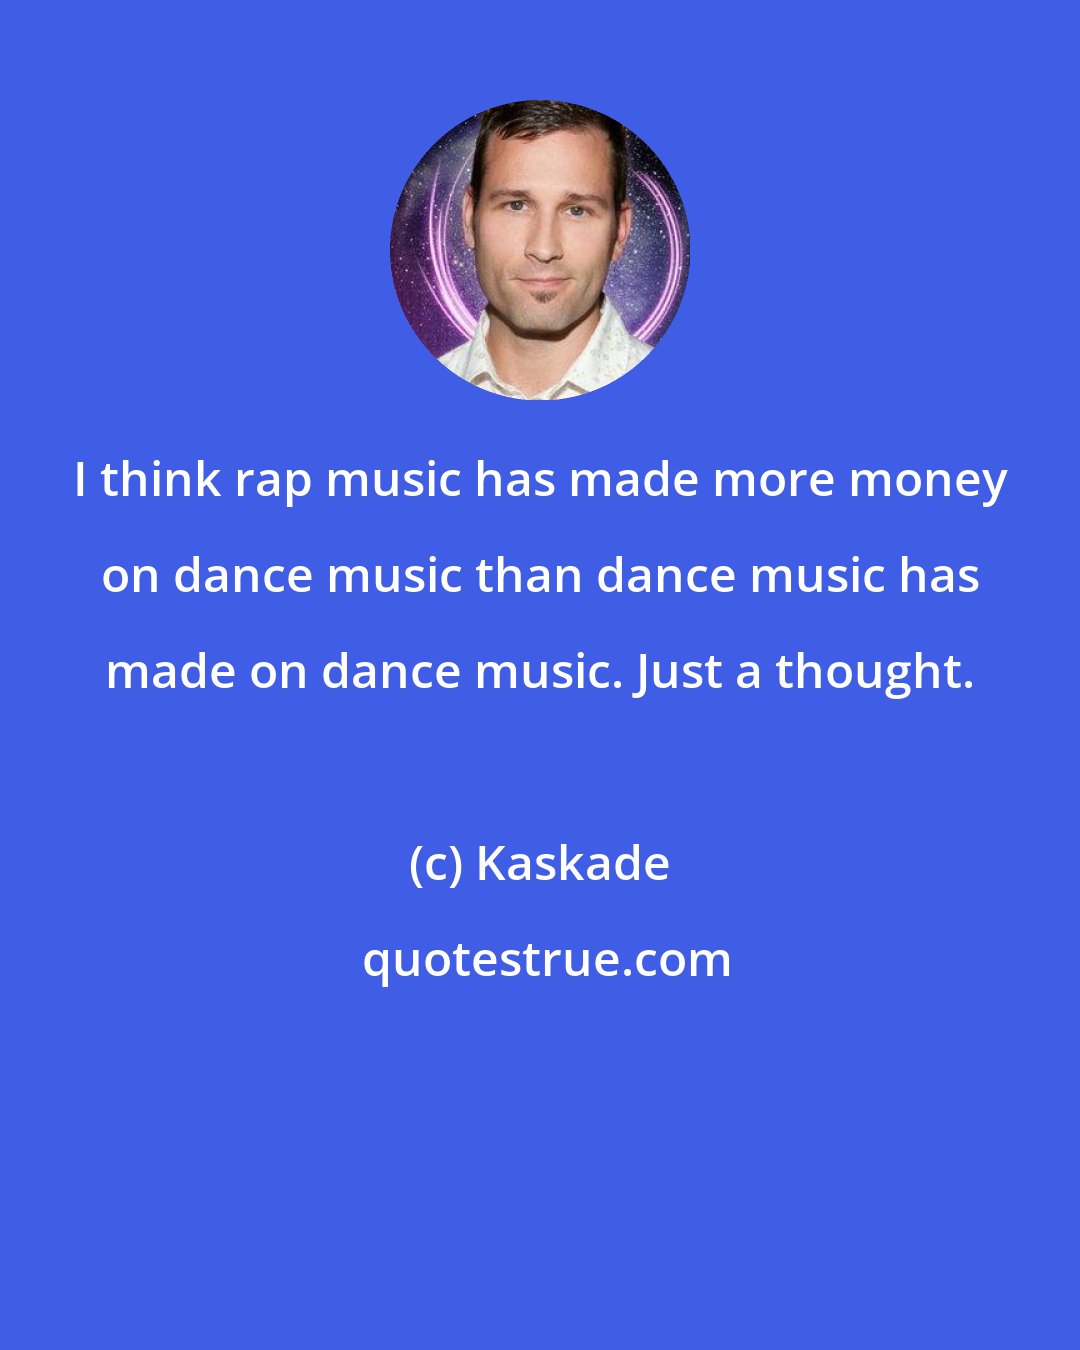 Kaskade: I think rap music has made more money on dance music than dance music has made on dance music. Just a thought.